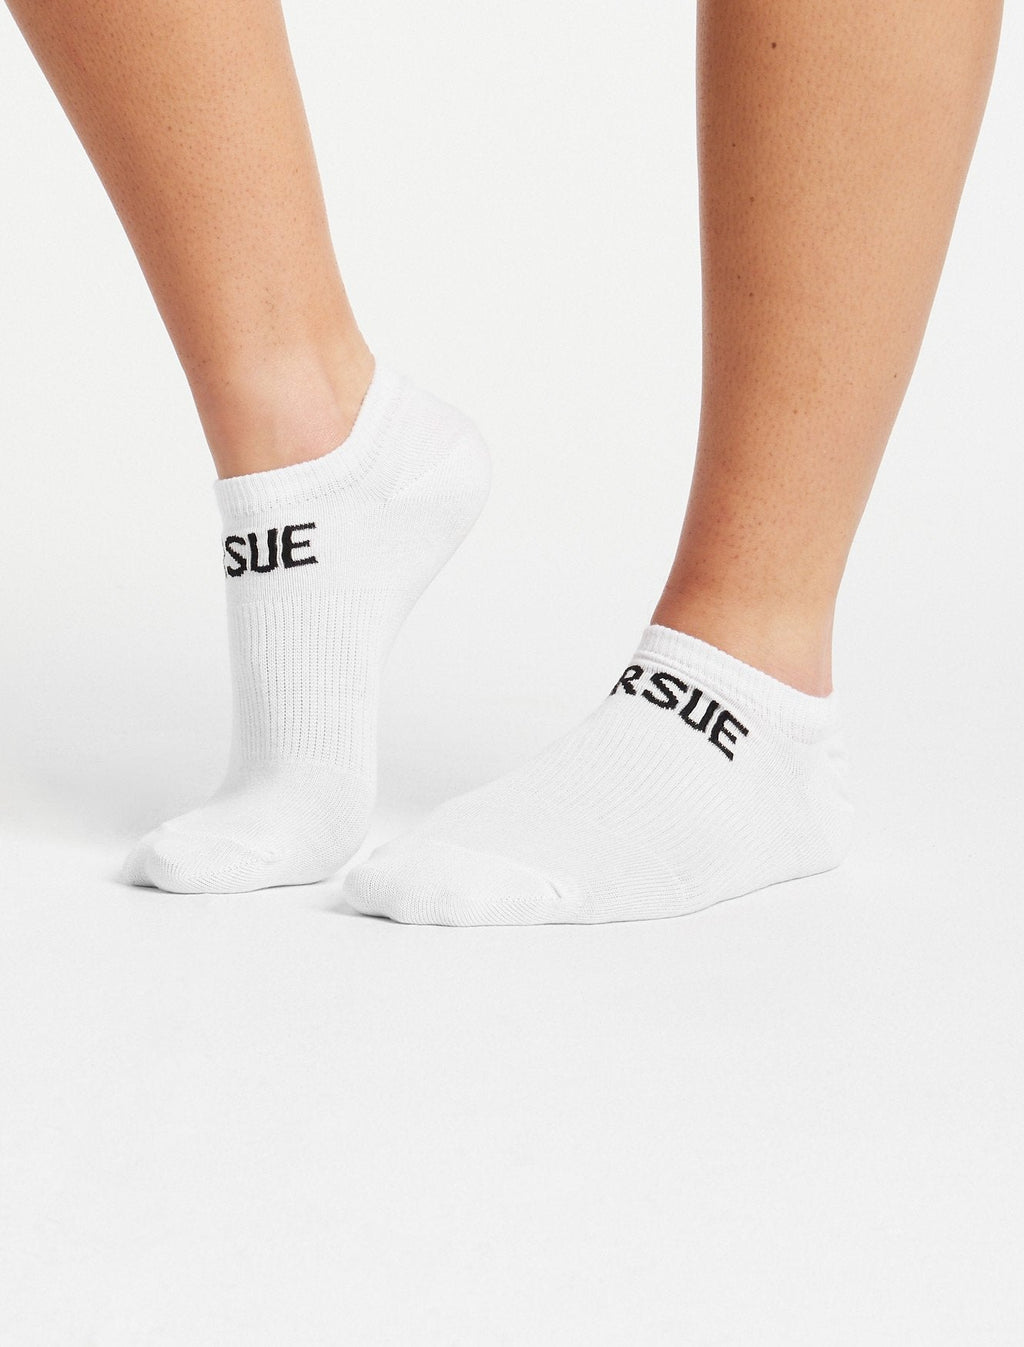 products/accessories-trainer-socks-white-unisex.jpg